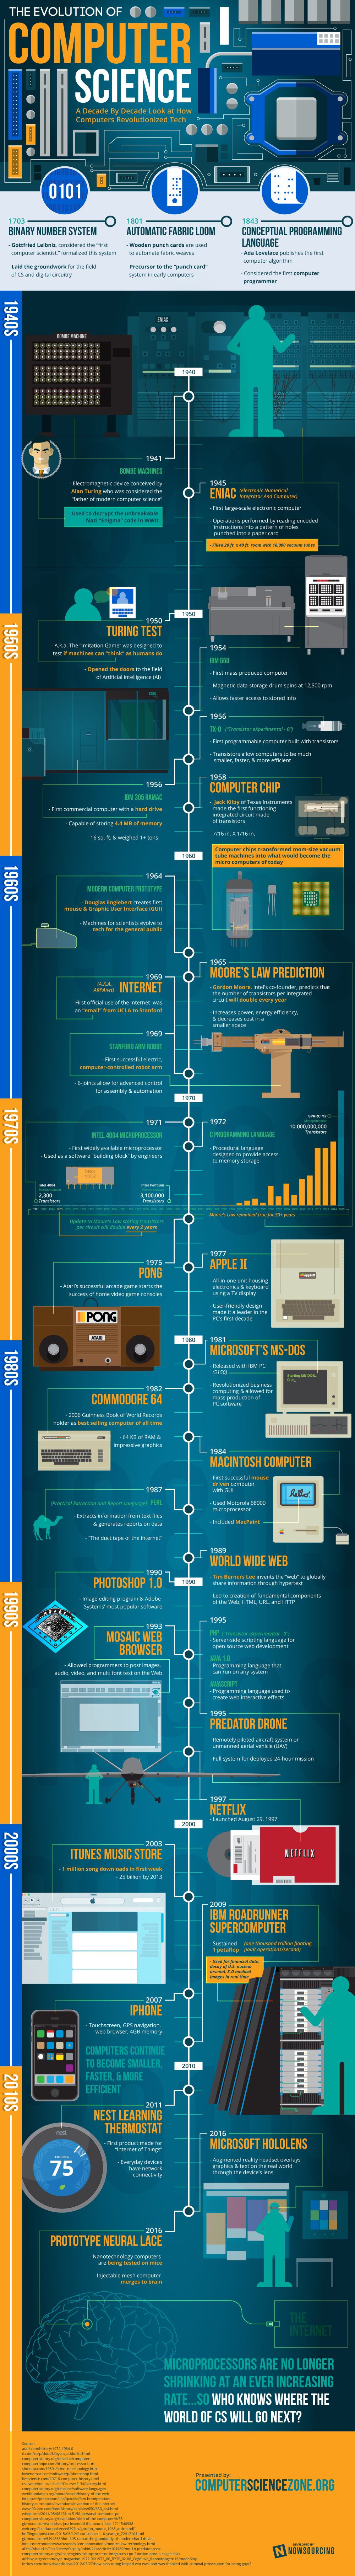 History of computer science